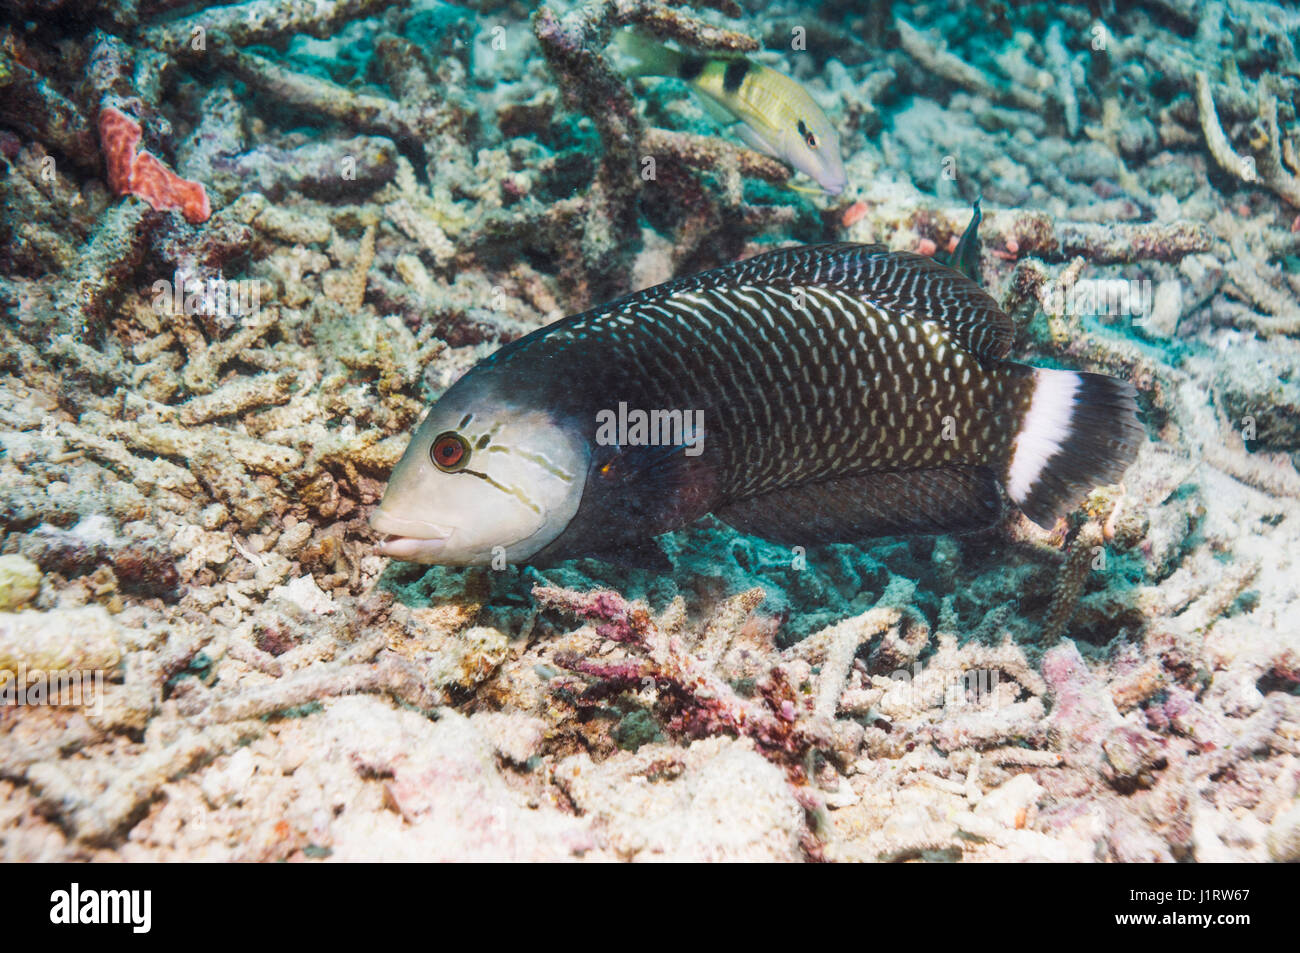 Rockmover or Dragon wrasse [Novaculichthys taeniourus] foraging over coral rubble.  Indonesia. Stock Photo